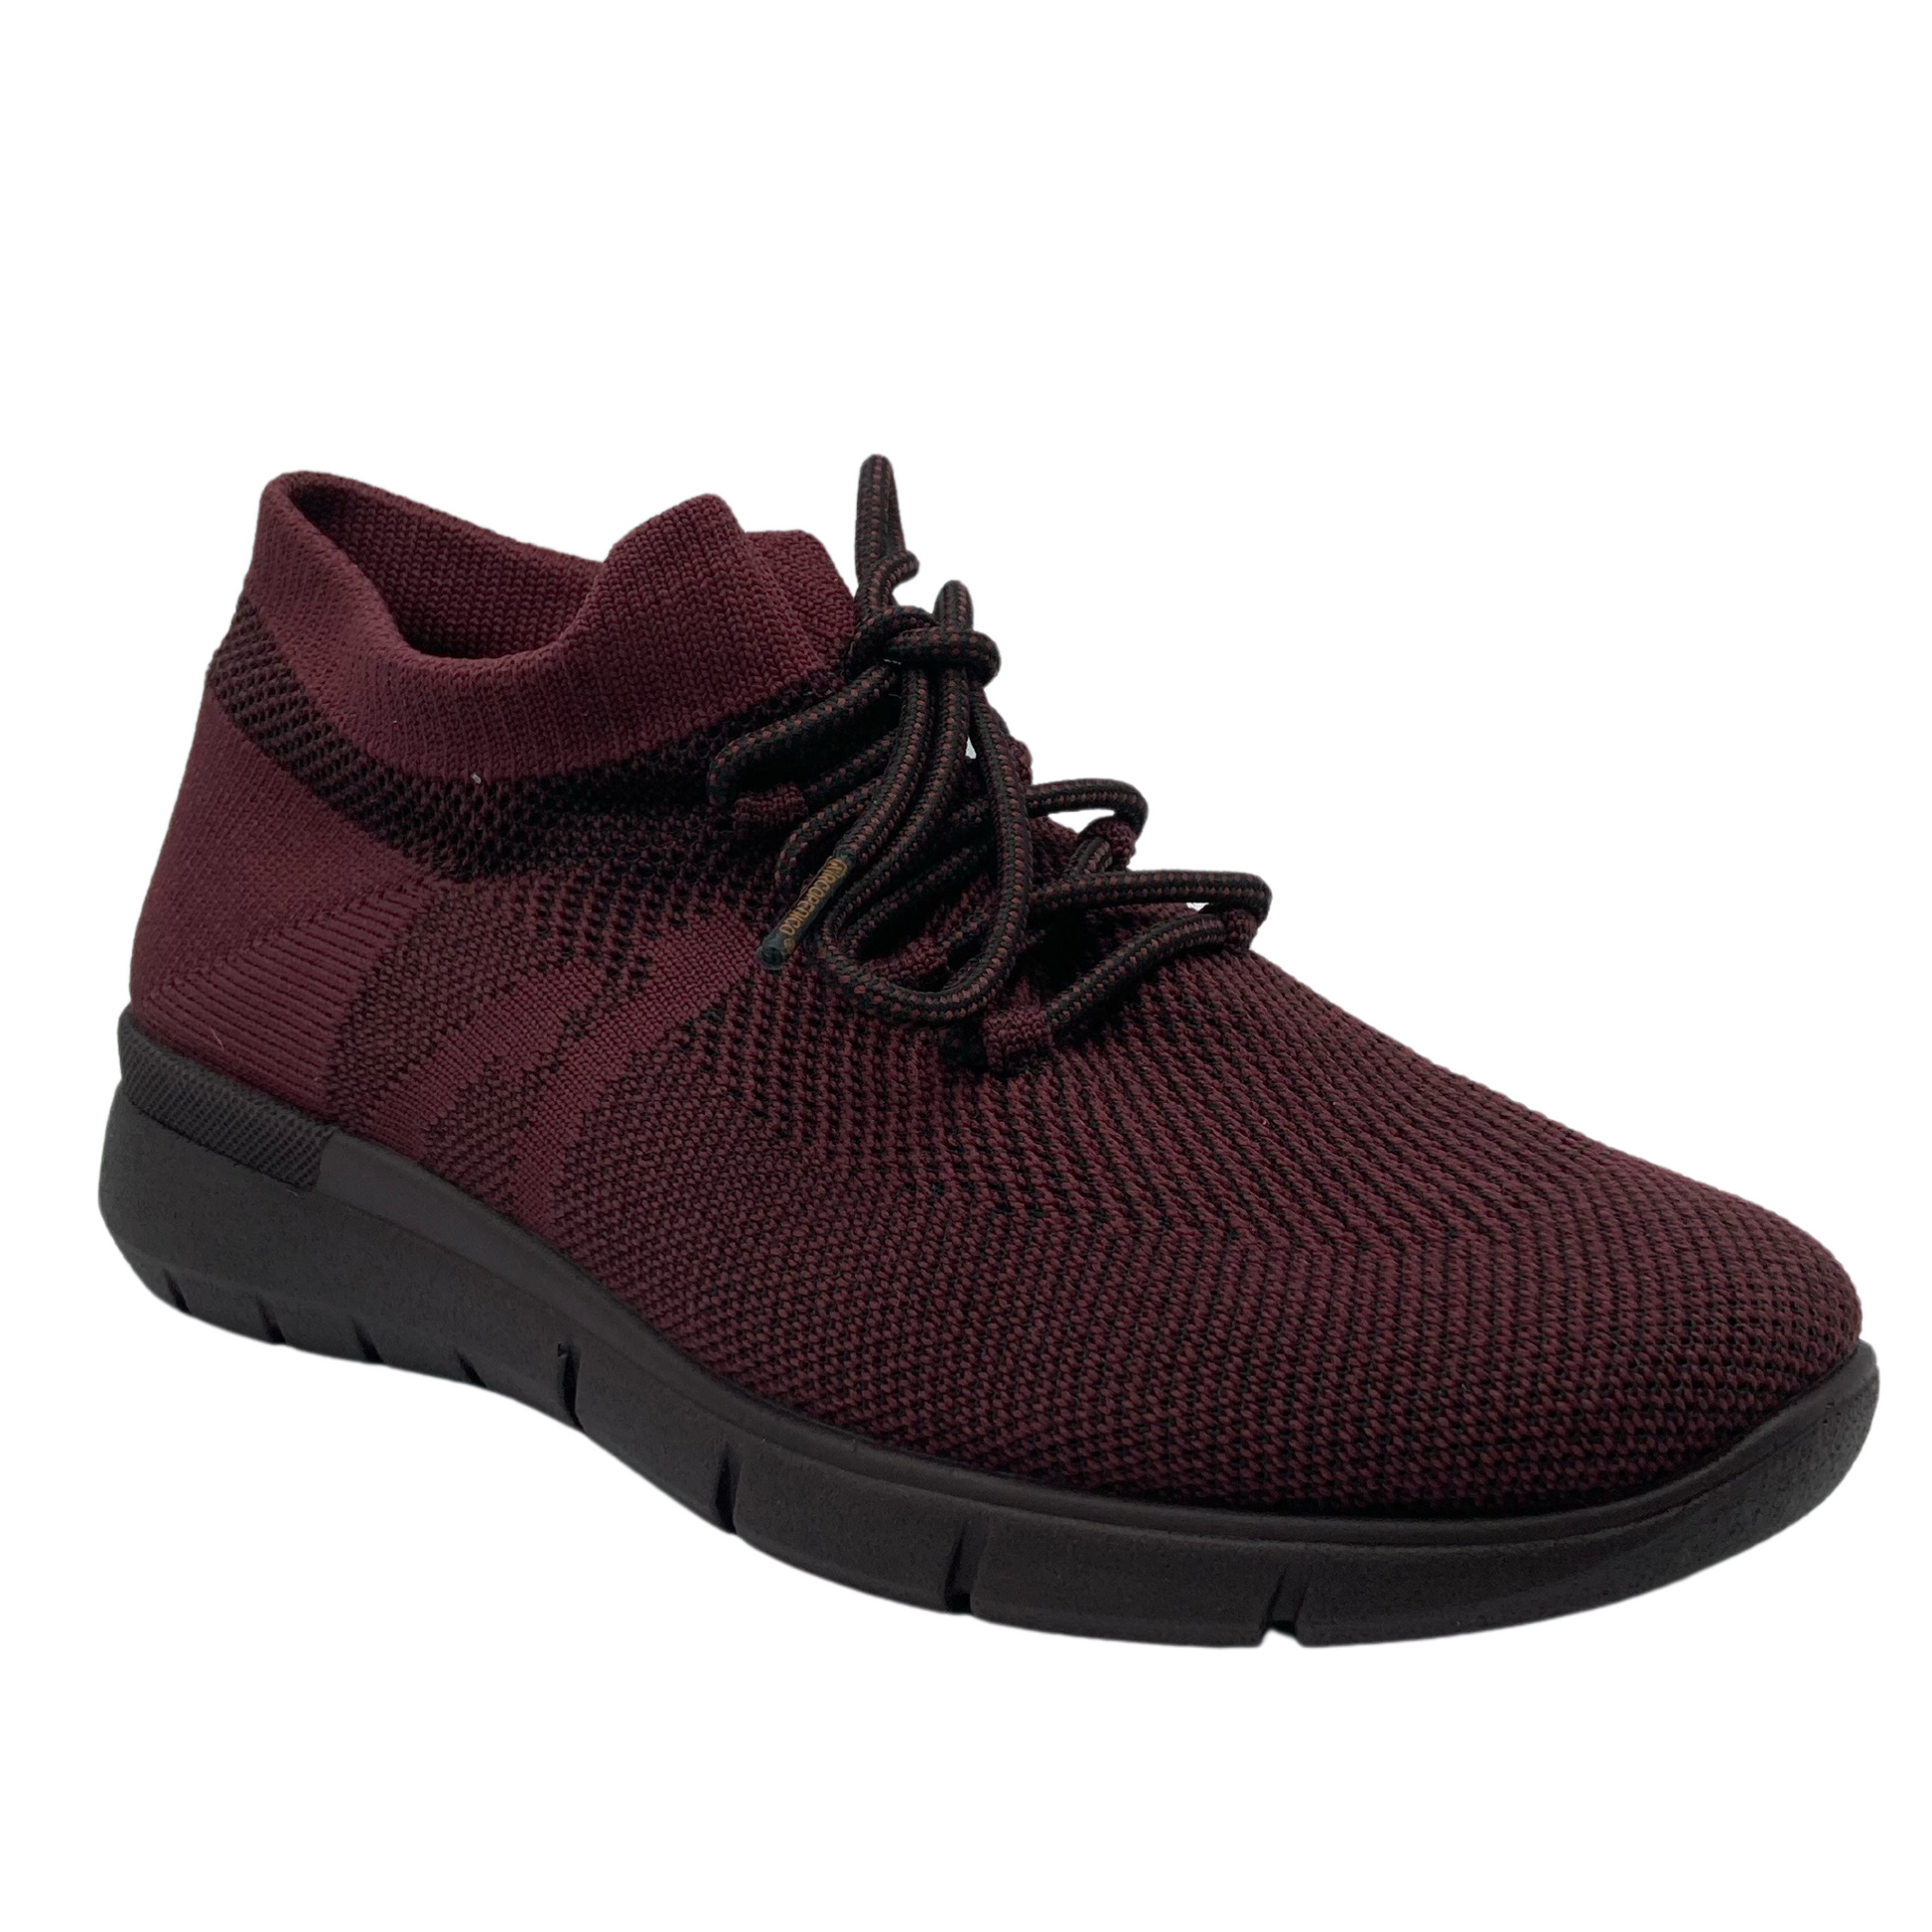 45 degree angled view of wine coloured mesh sneaker with matching laces and brown outsole